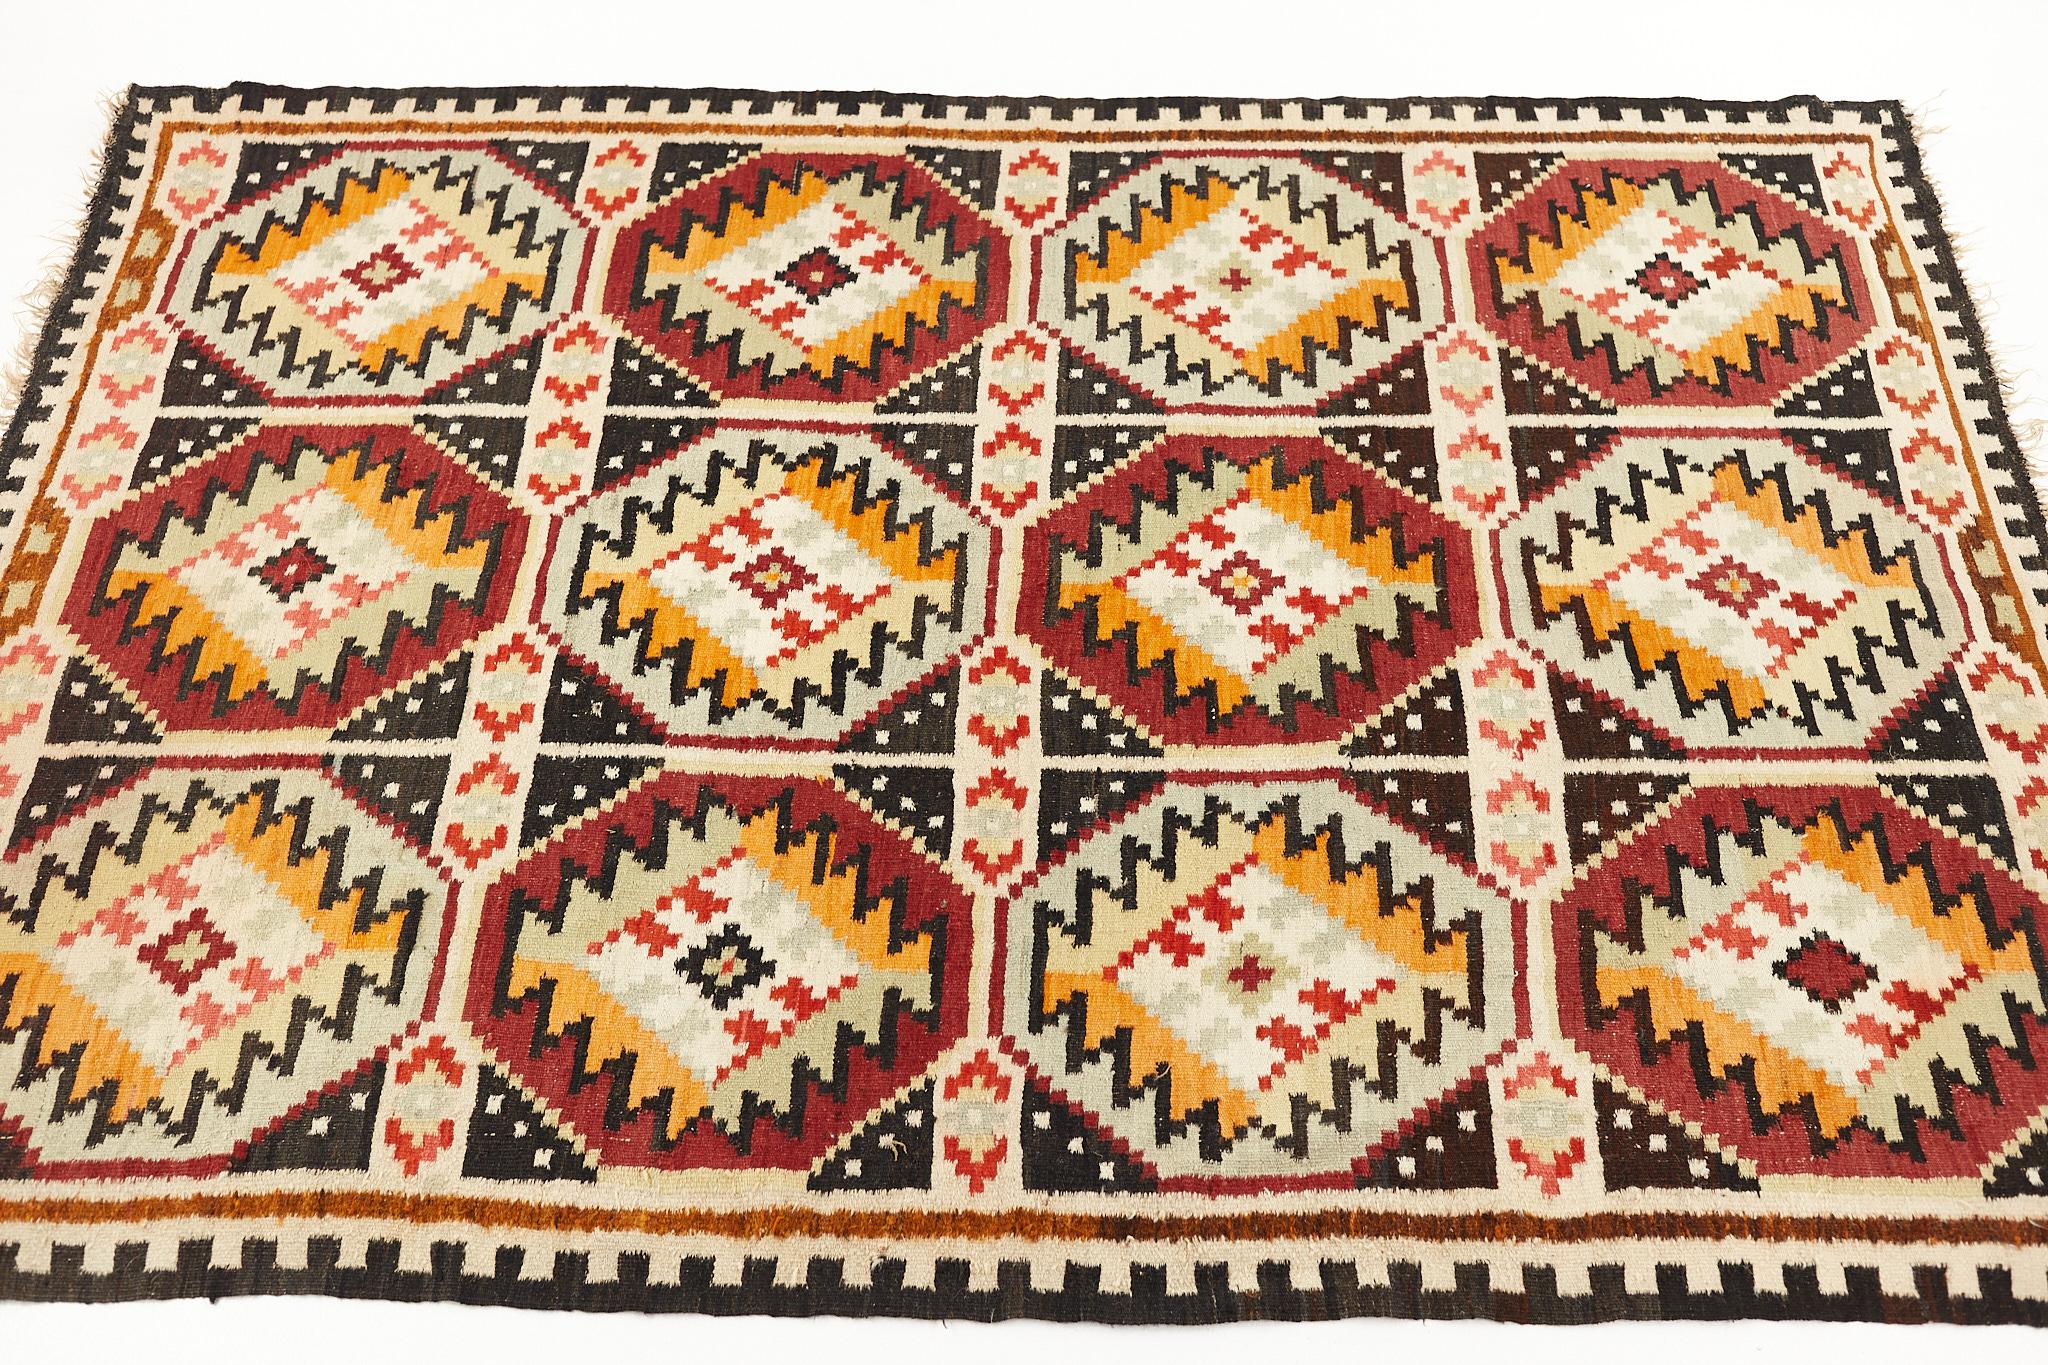 Mid Century Southwest Inspired flat weave wool rug

This Rug is in Good Vintage Condition

This rug measures: 108 wide x 78 inches deep

We take our photos in a controlled lighting studio to show as much detail as possible. We do not photoshop